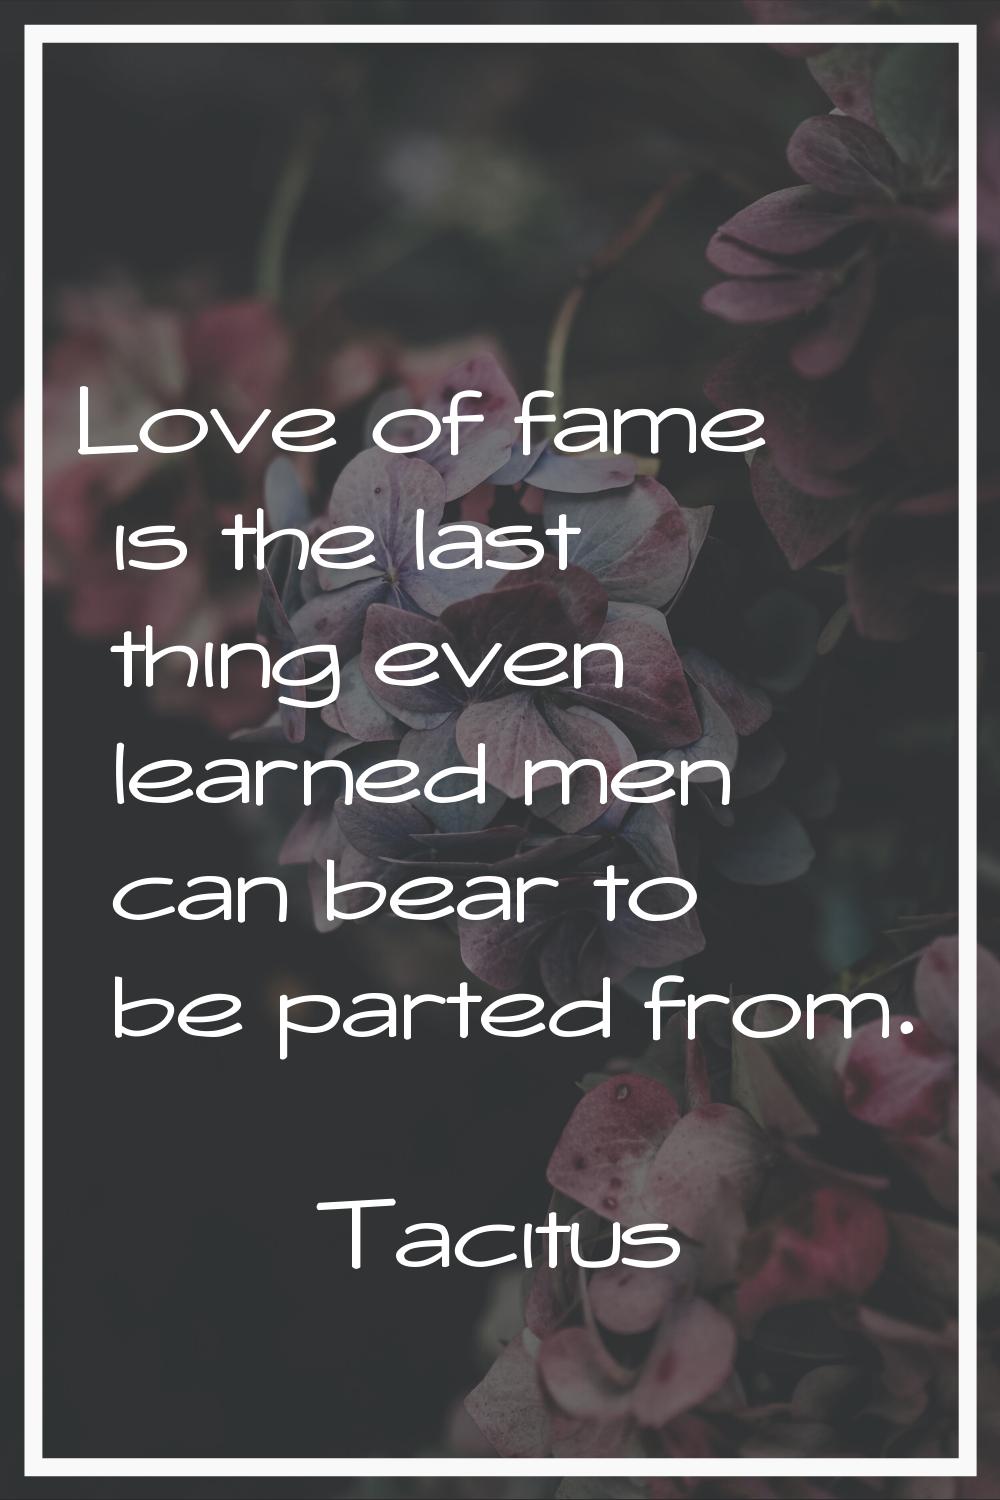 Love of fame is the last thing even learned men can bear to be parted from.